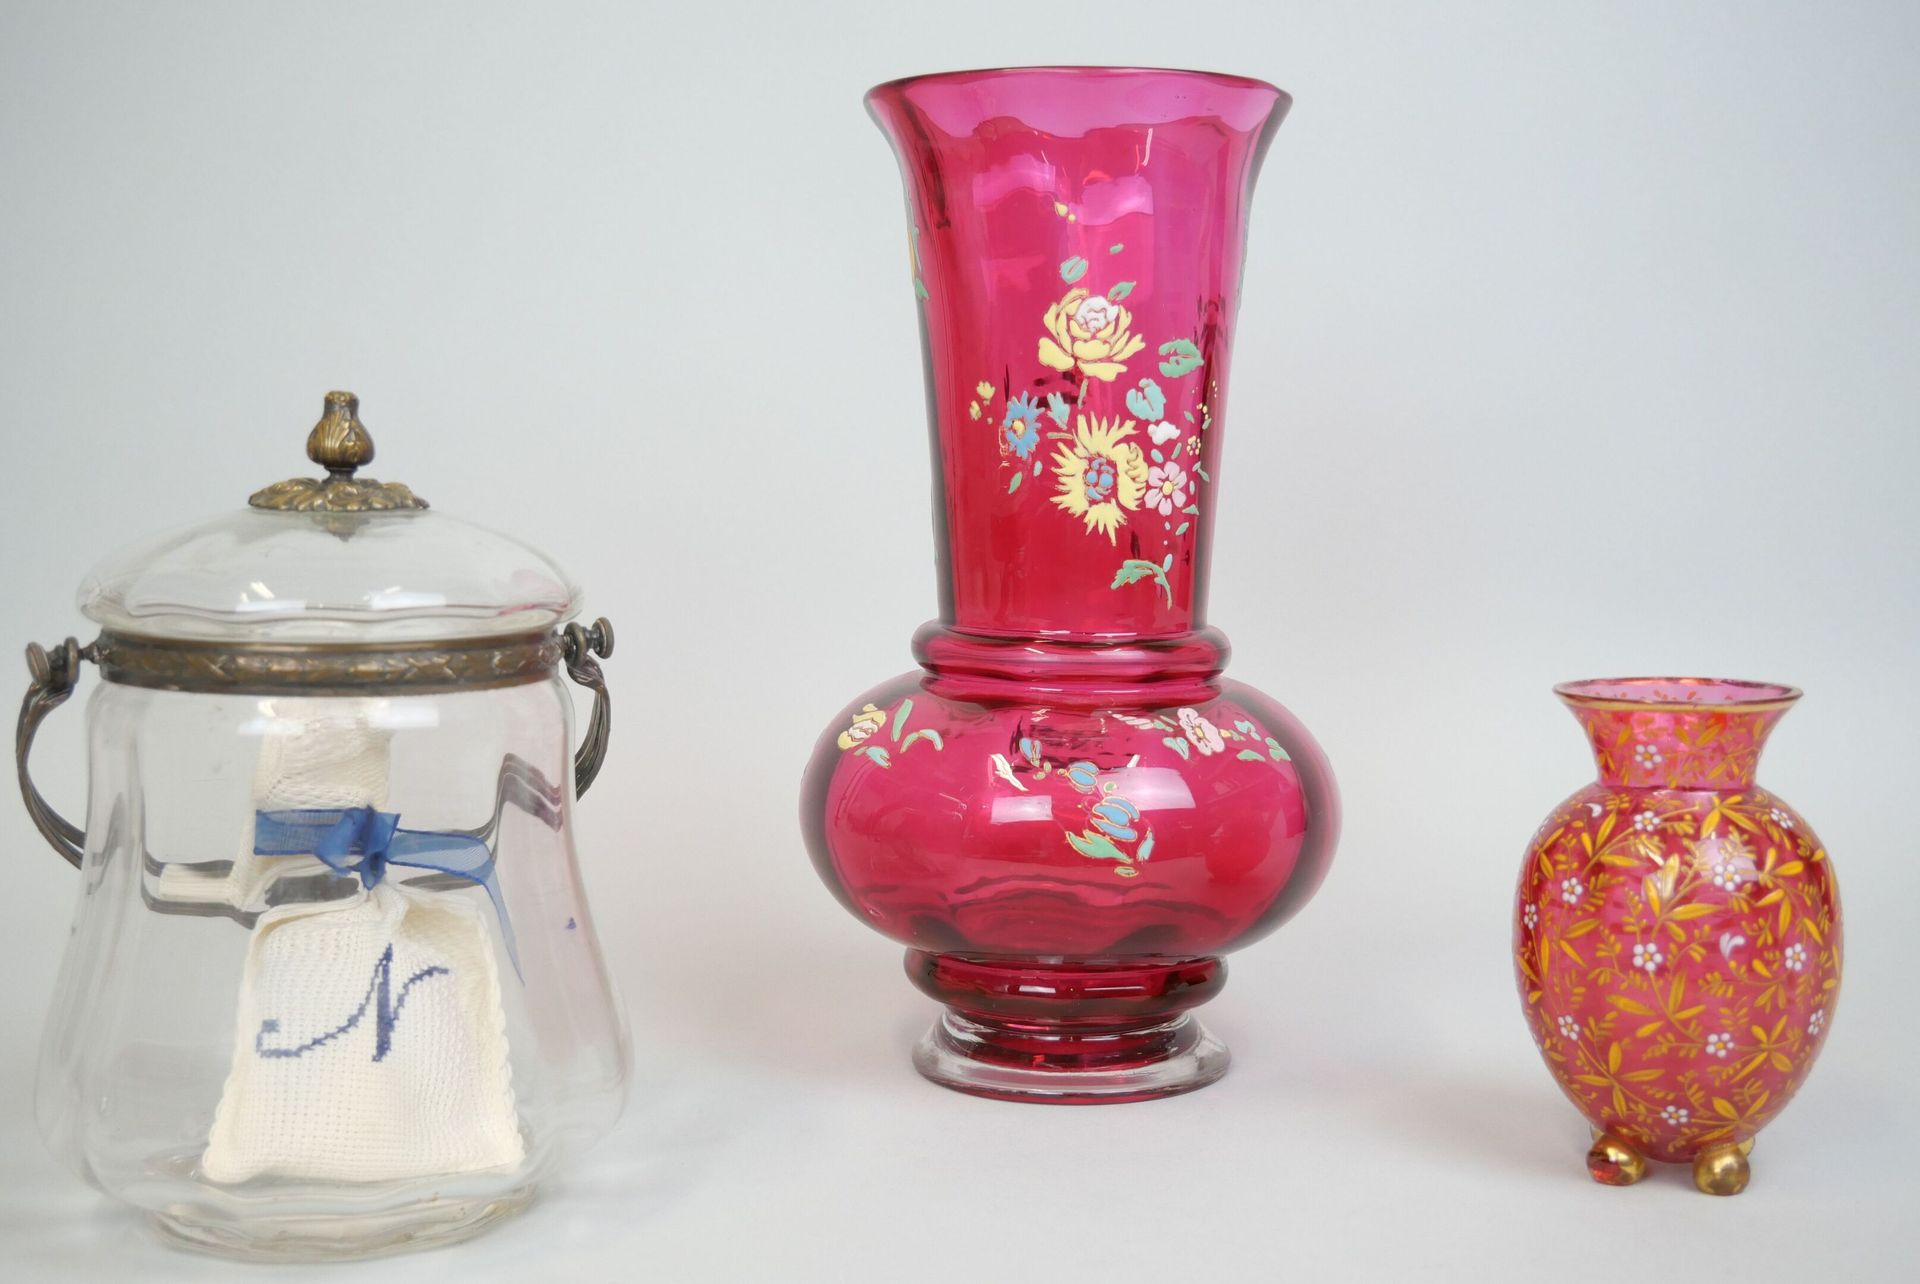 Null Lot of glassware including : 

- A small red tinted glass vase with enamell&hellip;